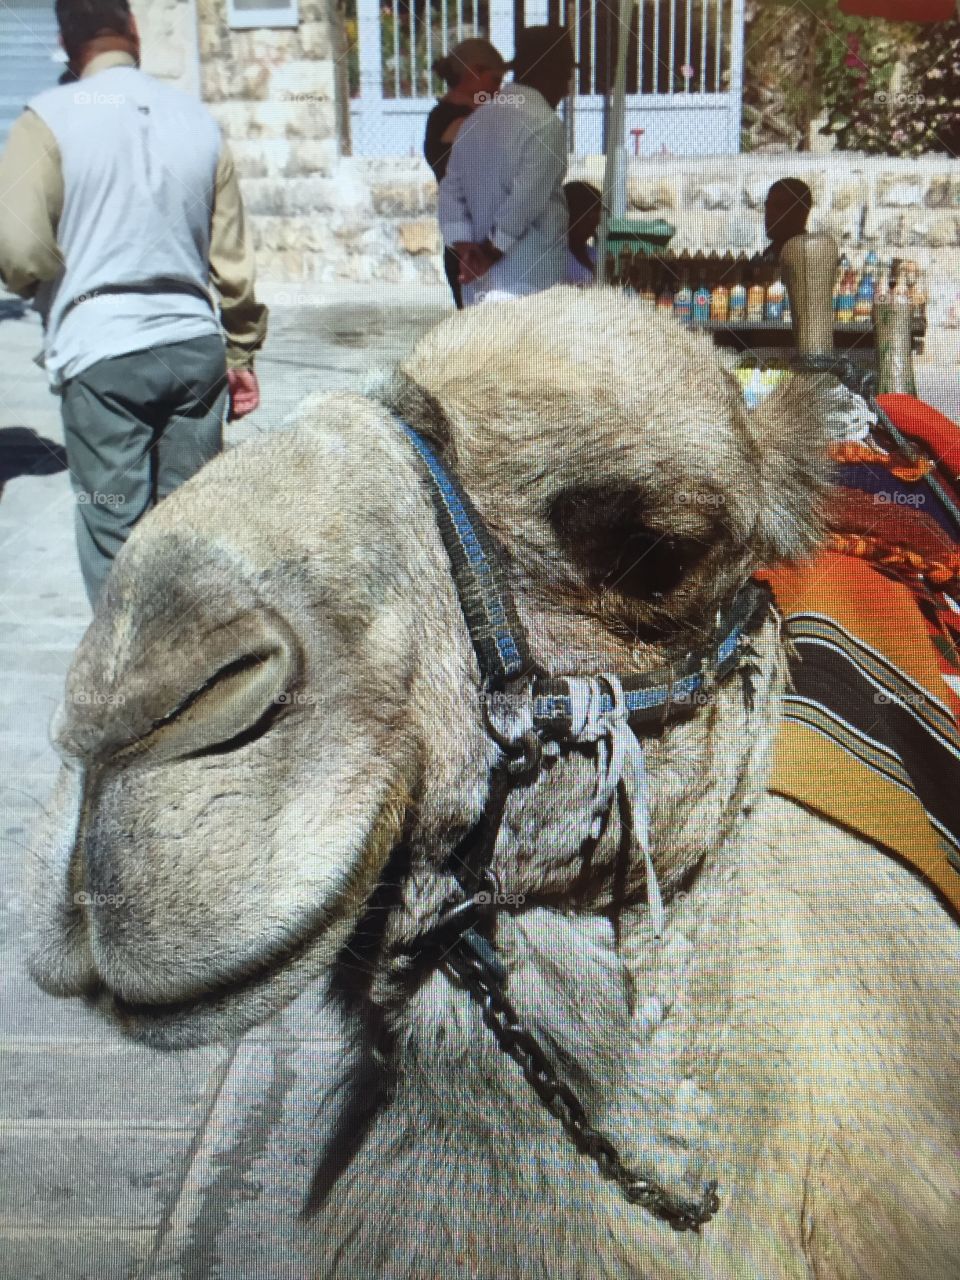 A camel. Ready for a ride in Jordan.